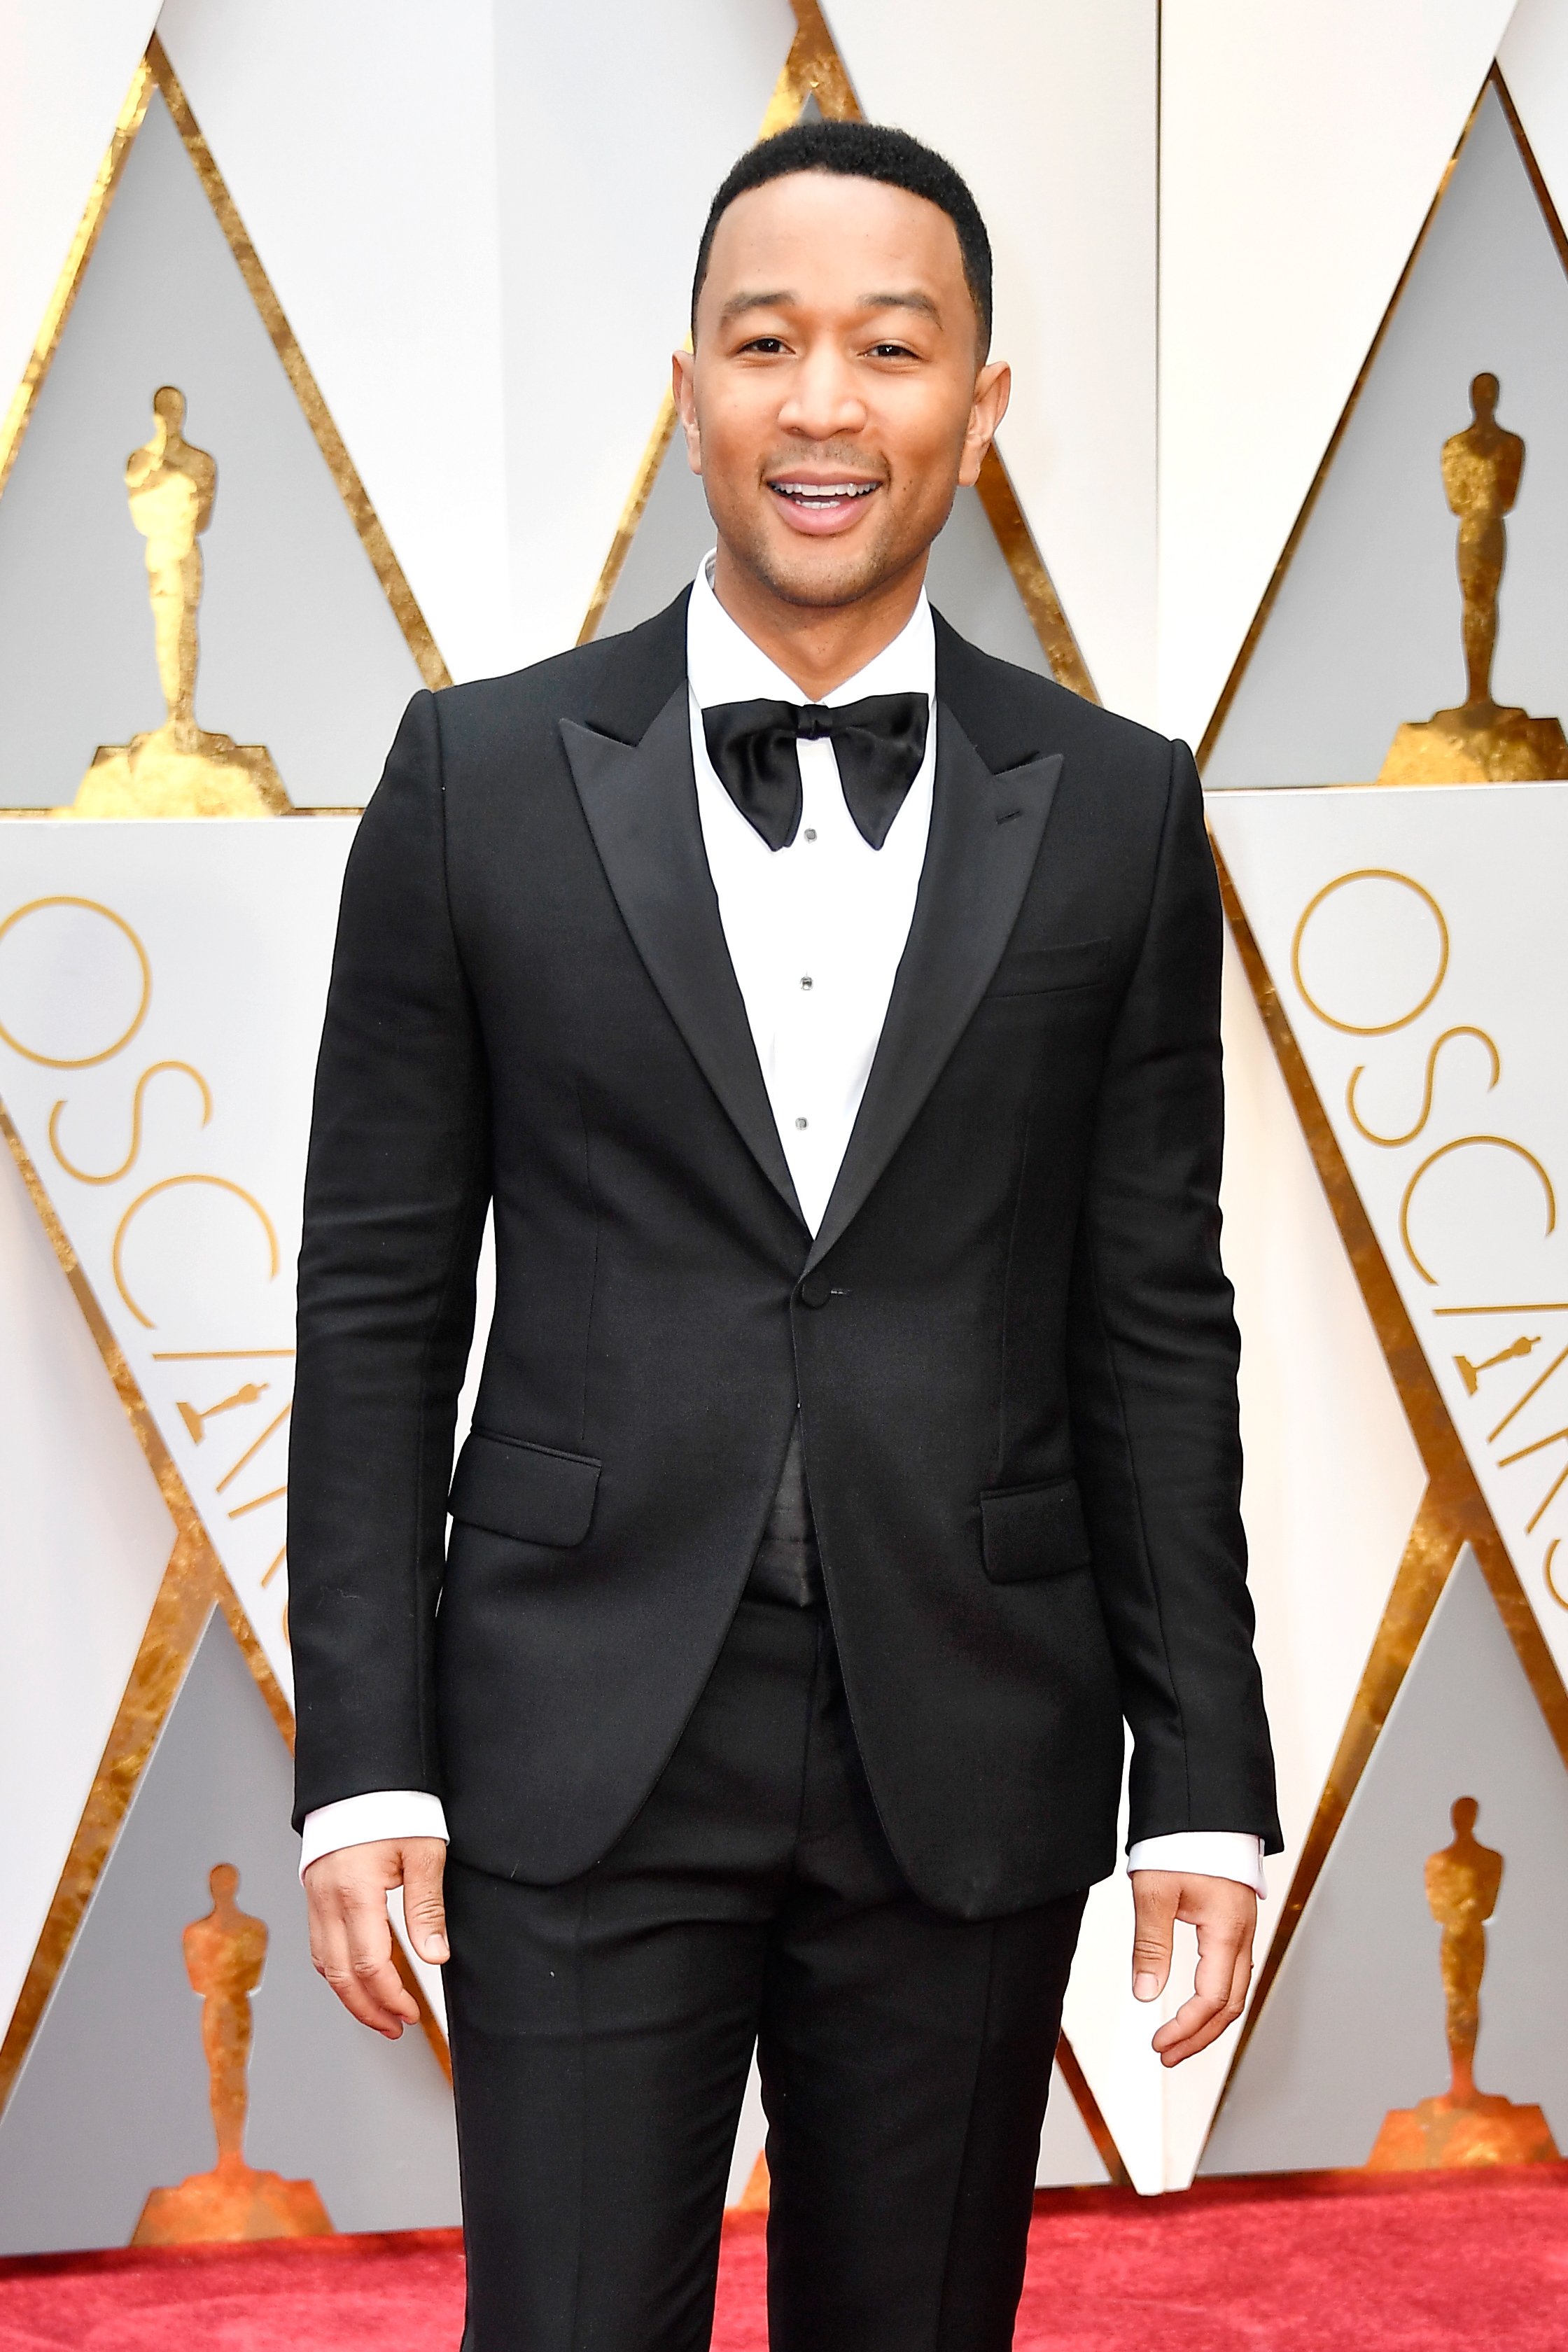 John Legend attends the 89th Annual Academy Awards at Hollywood & Highland Center on February 26, 2017 in Hollywood